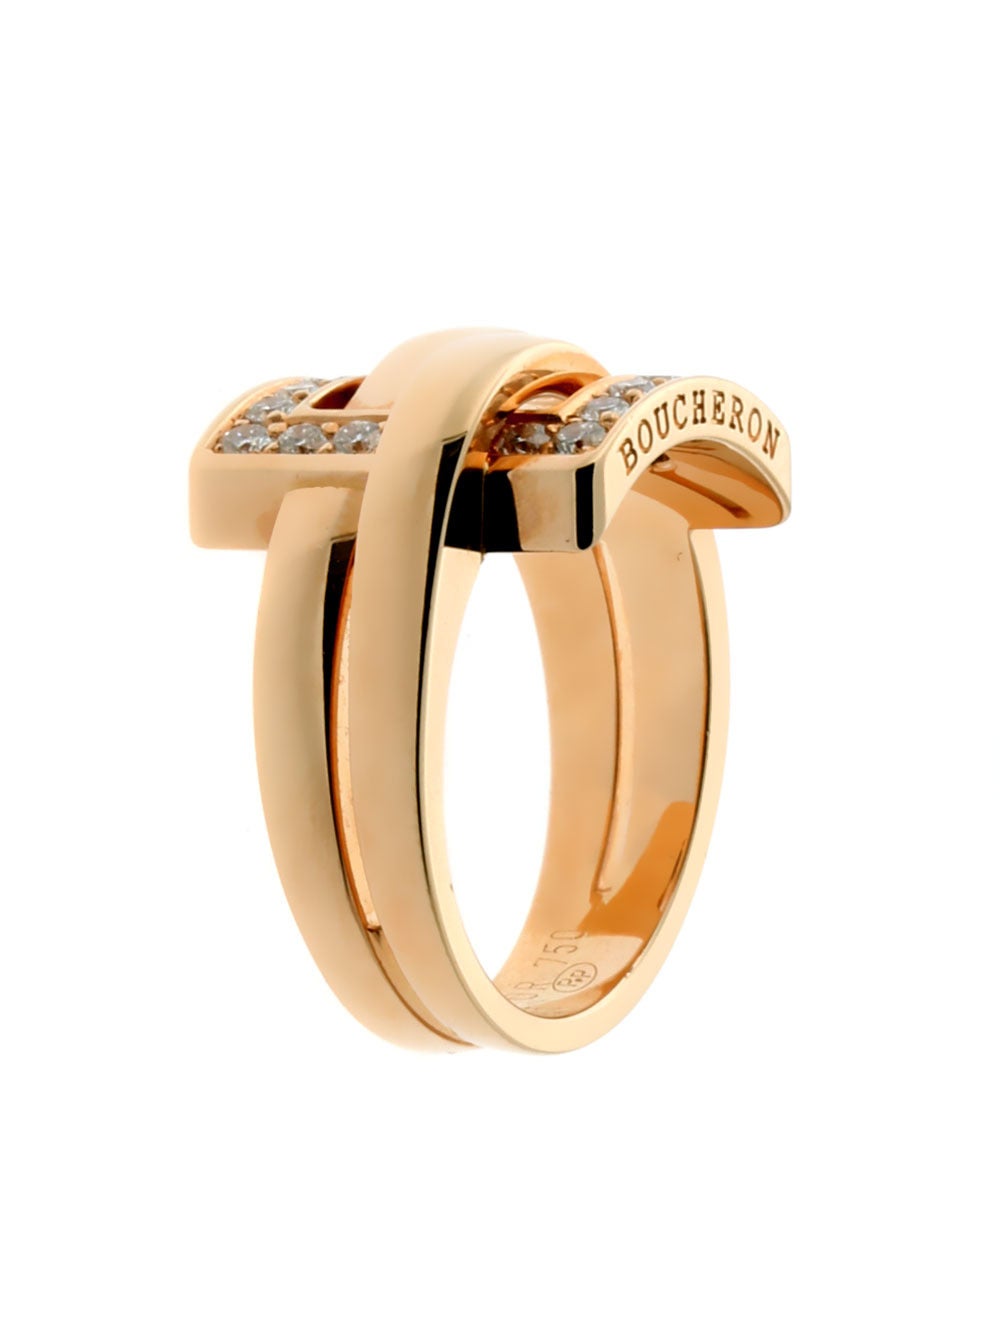 This unique Boucheron designer ring has a bold style all its own. Round brilliant cut diamonds are set in warm 18k rose gold. This contemporary piece is a must-have ring for your designer collection.

Diamonds: 22 Round Brilliant Cut Diamonds